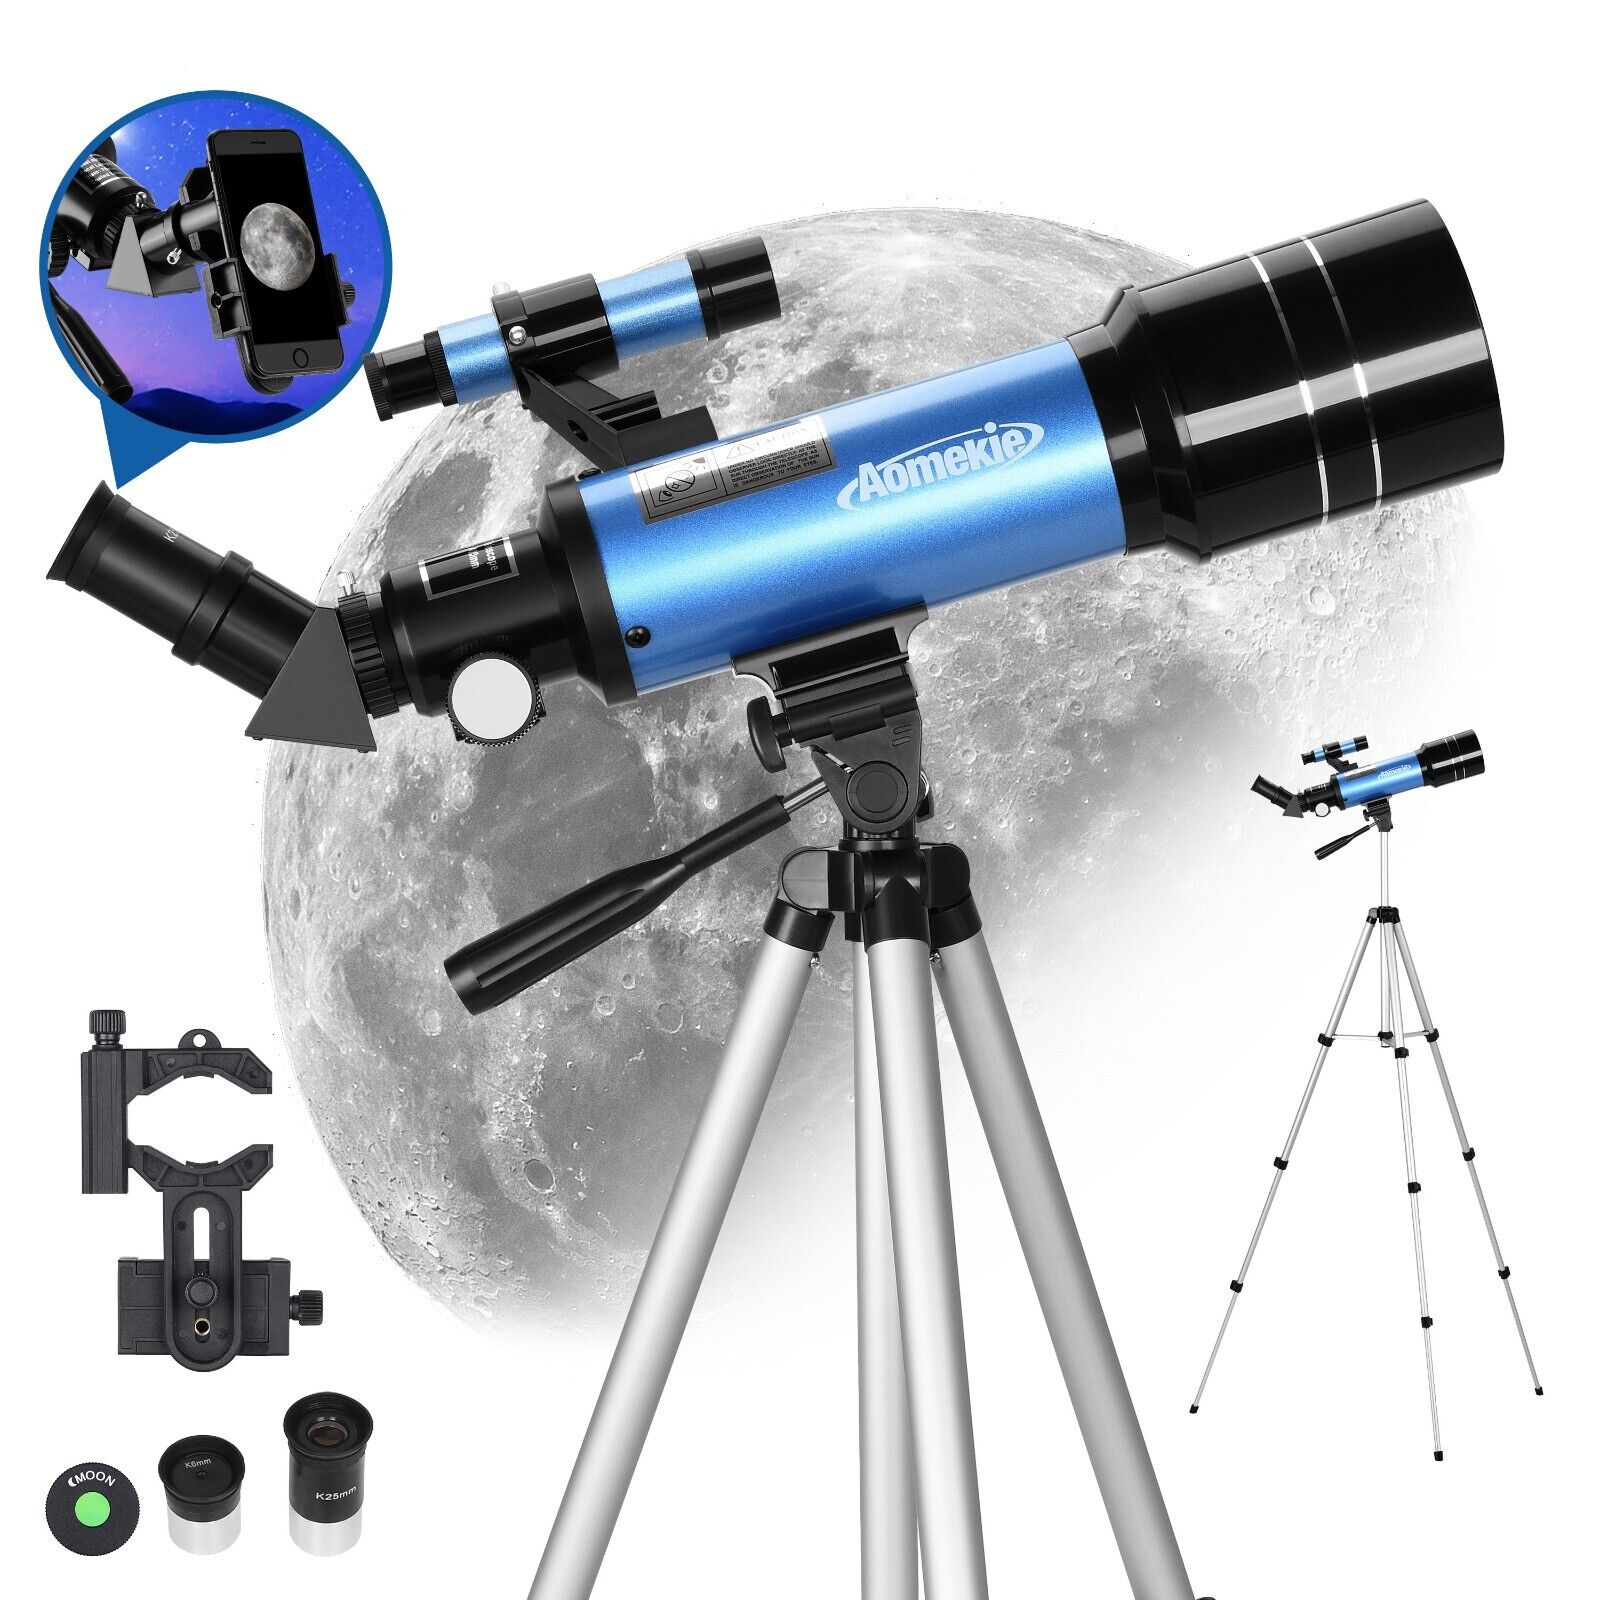 Promotion New Telescope 70/400mm with Adjustable Tripod Mobile Holder Kids Gift